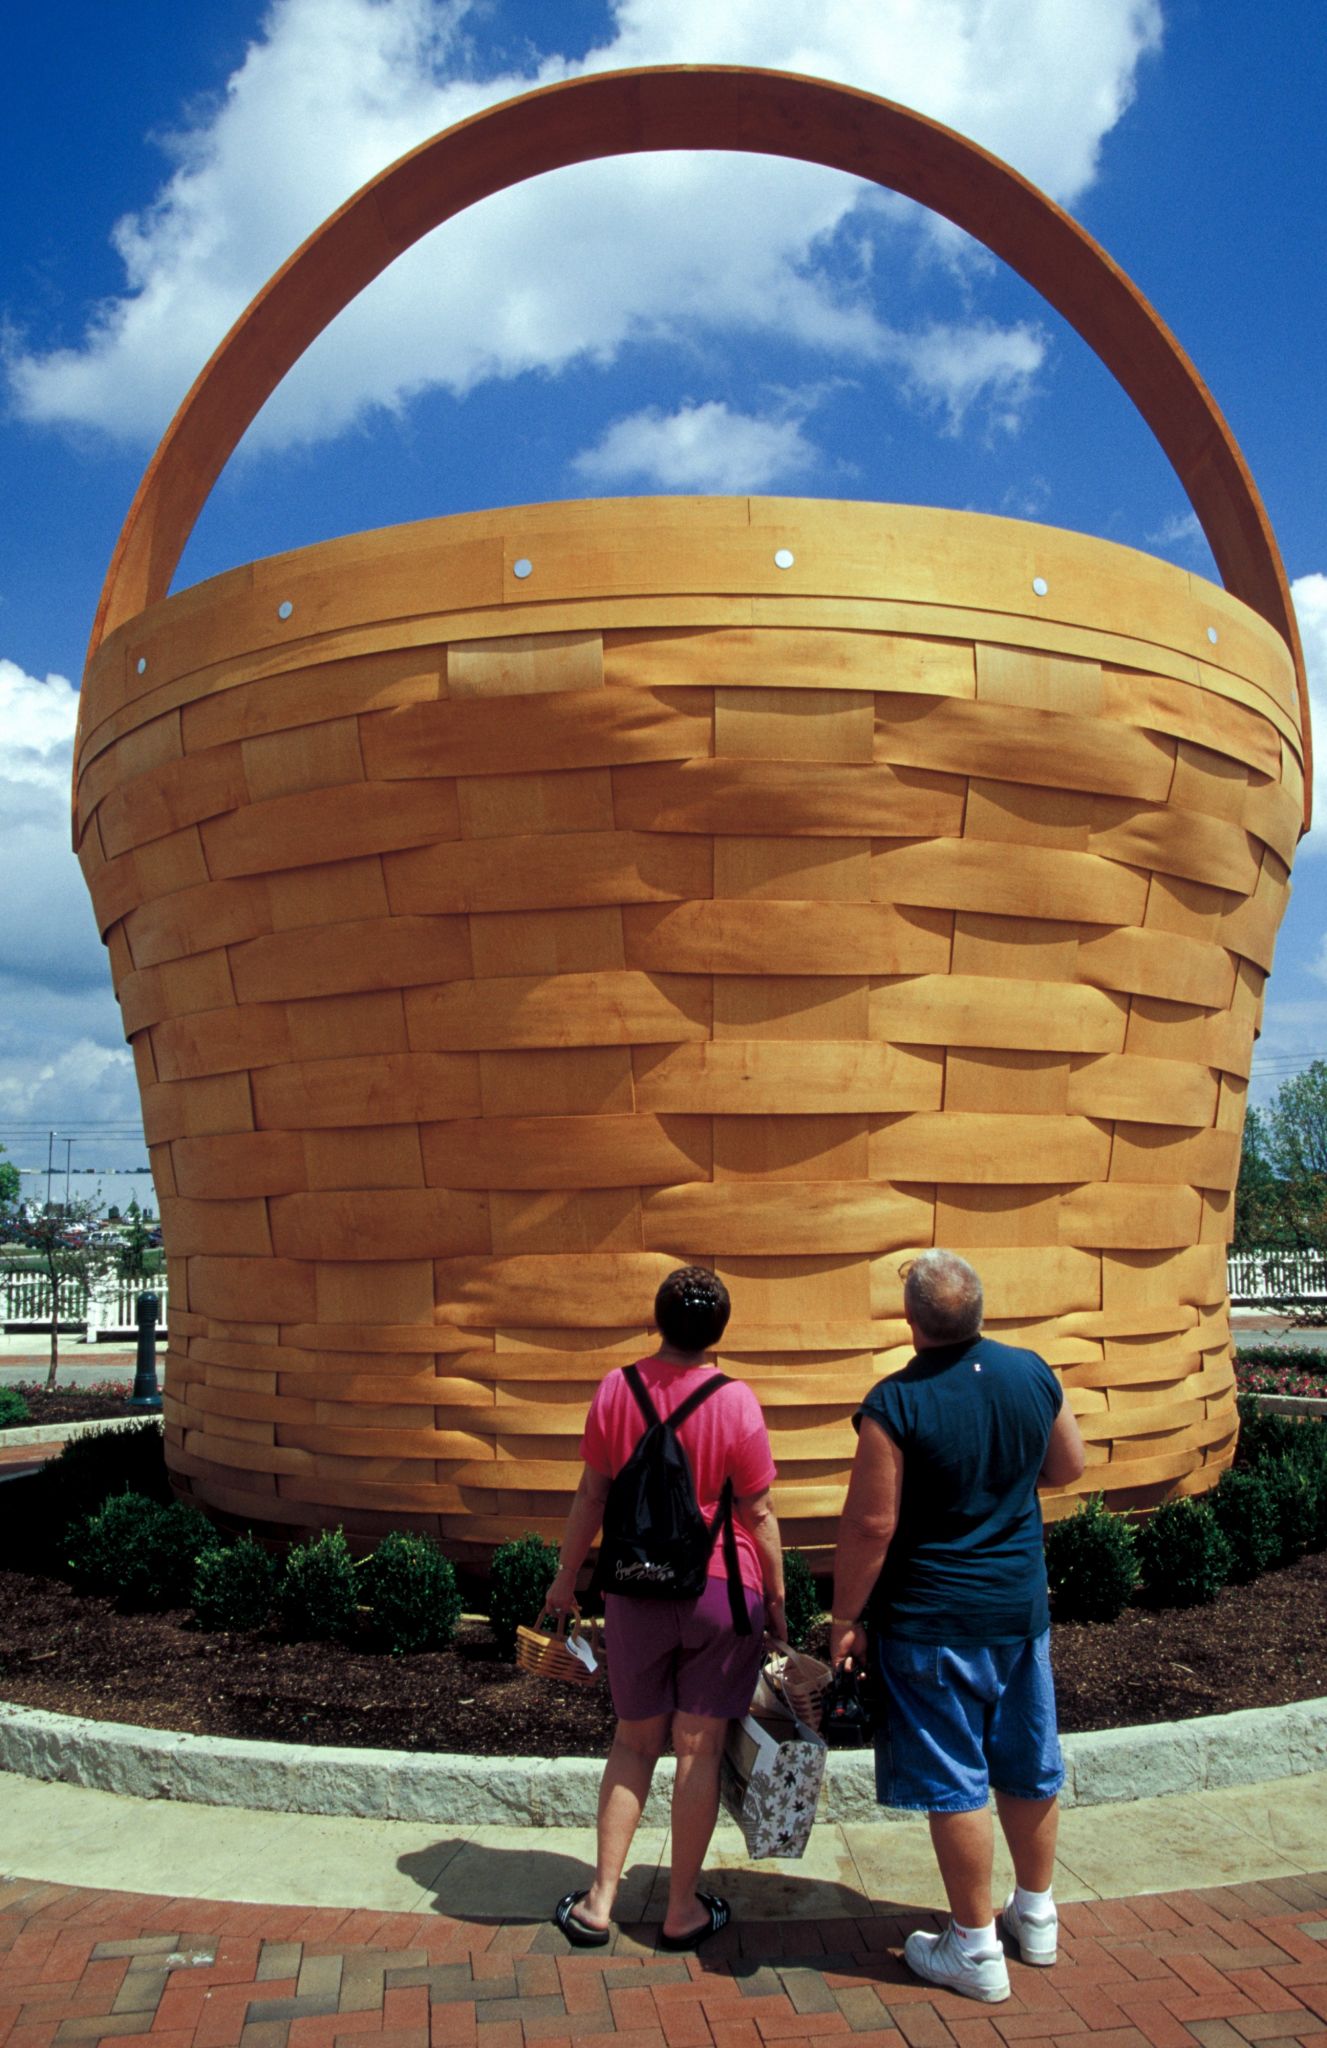 Ohio's famous basket building finally sold